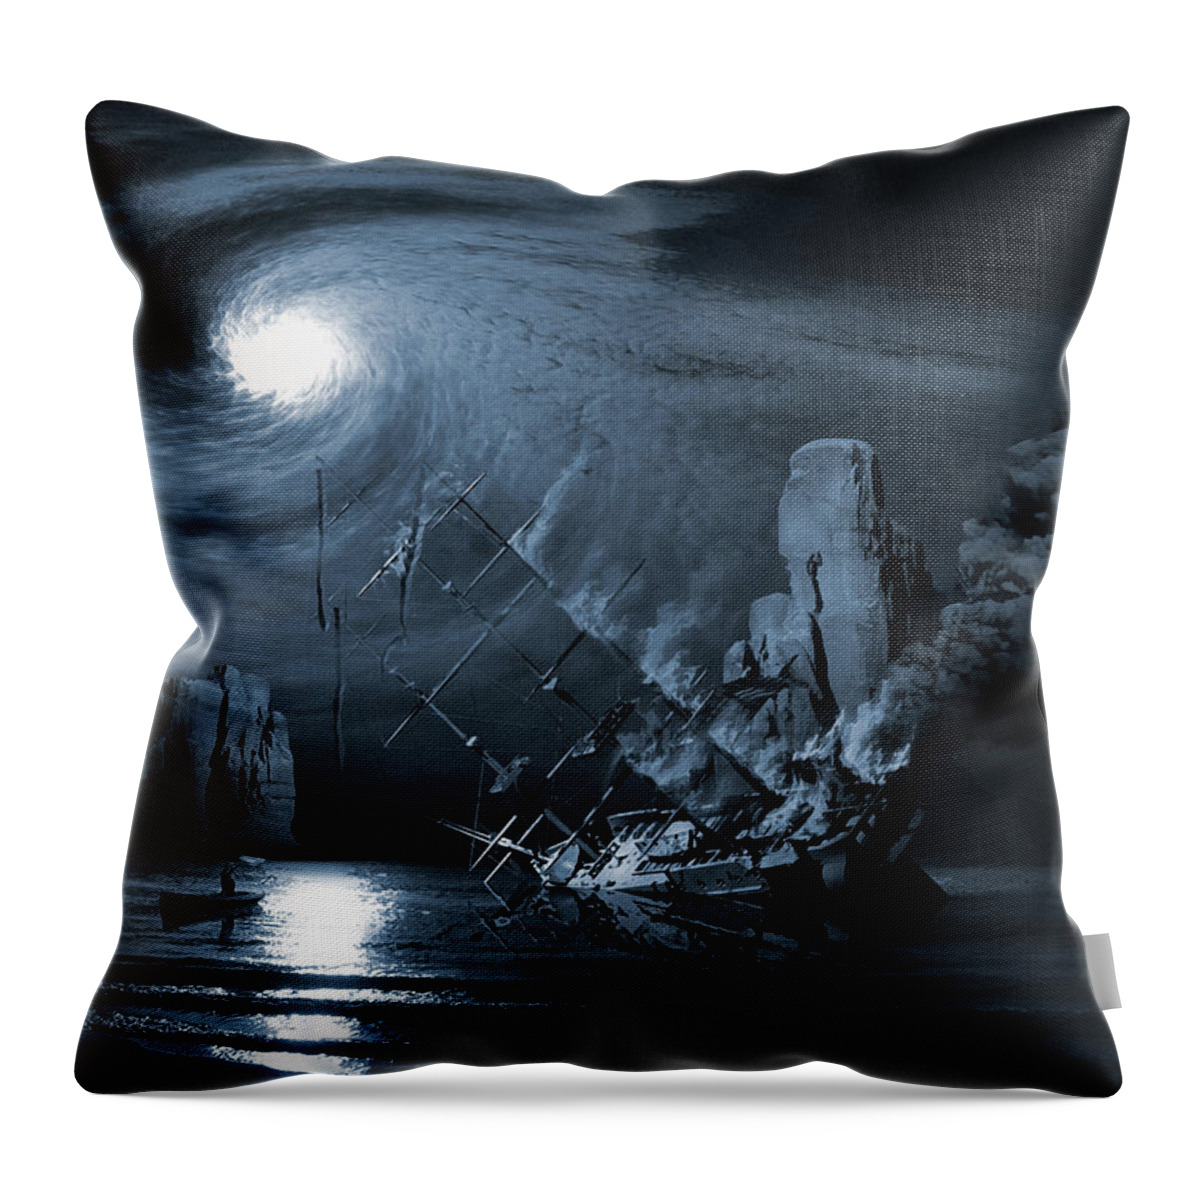 Legend Myth Saga Legend Boats Stories Fact Or Fiction Tall Tale Moonlight Vessel Yacht Phantom Flames Ocean Dark Examples Of Legends Examples Of Myths Throw Pillow featuring the digital art Ghost ship series The birth of the legend by George Grie